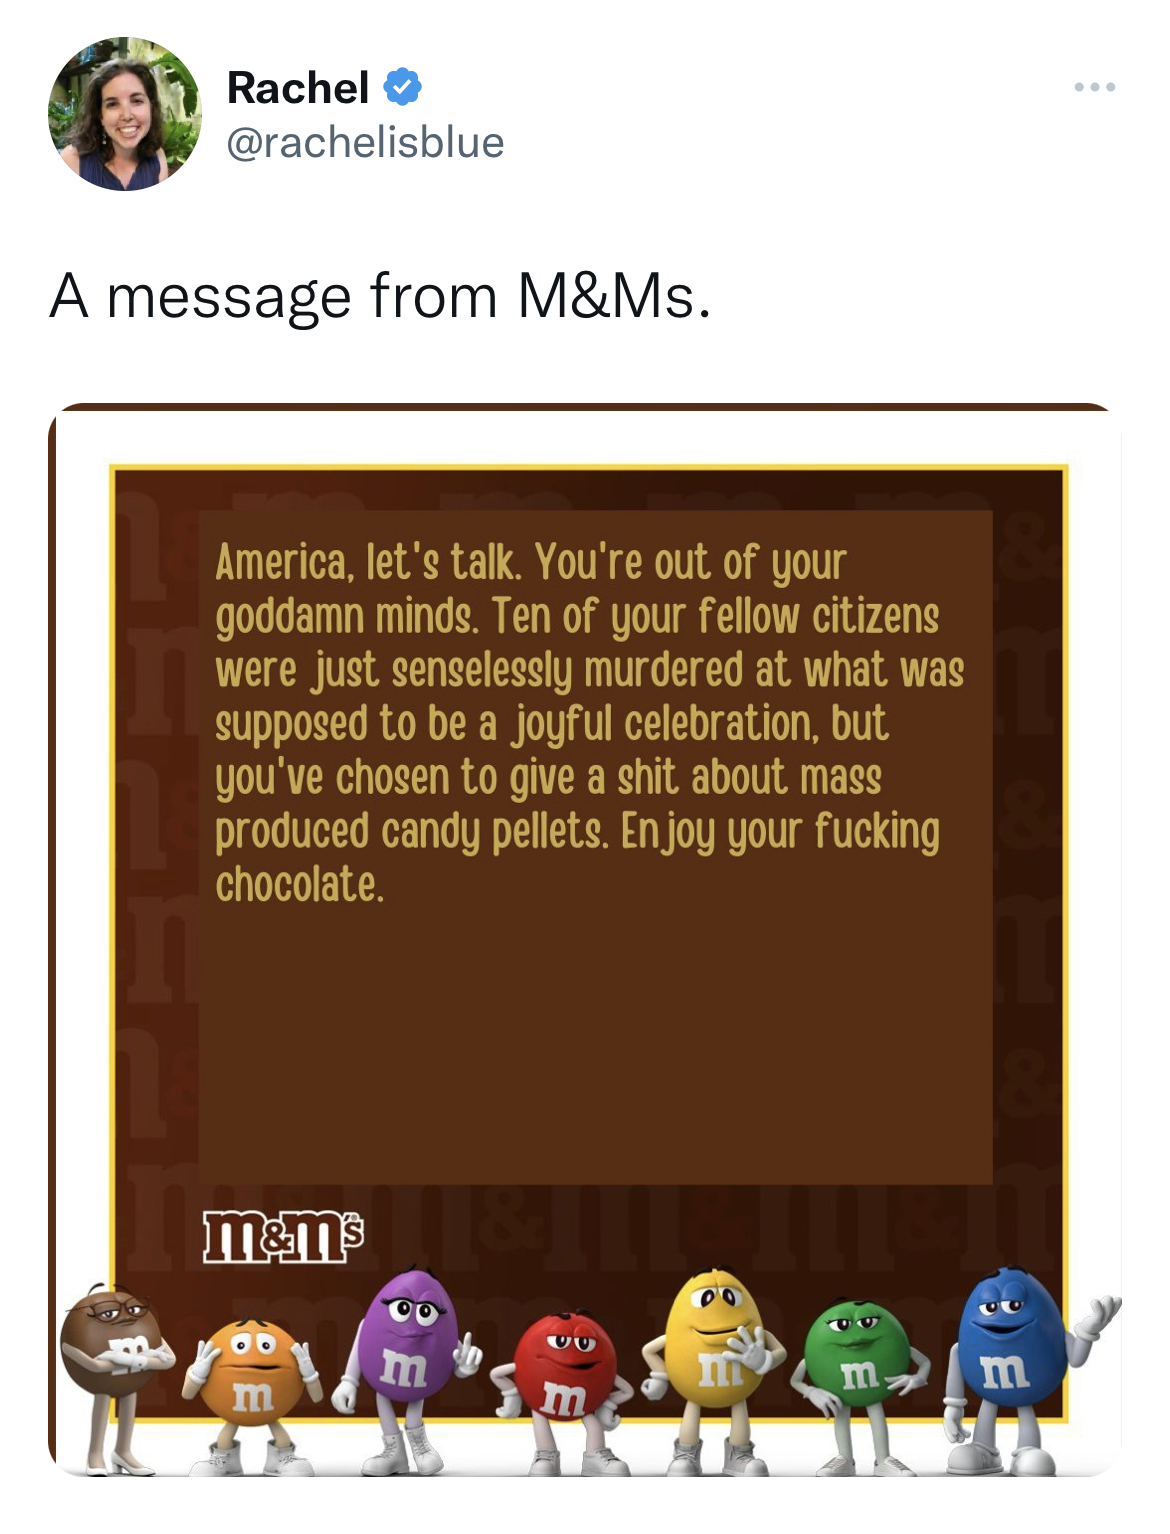 M&M's message spoofs - Rachel A message from M&Ms. America, let's talk. You're out of your goddamn minds. Ten of your fellow citizens were just senselessly murdered at what was supposed to be a joyful celebration, but you've chosen to give a shit about ma